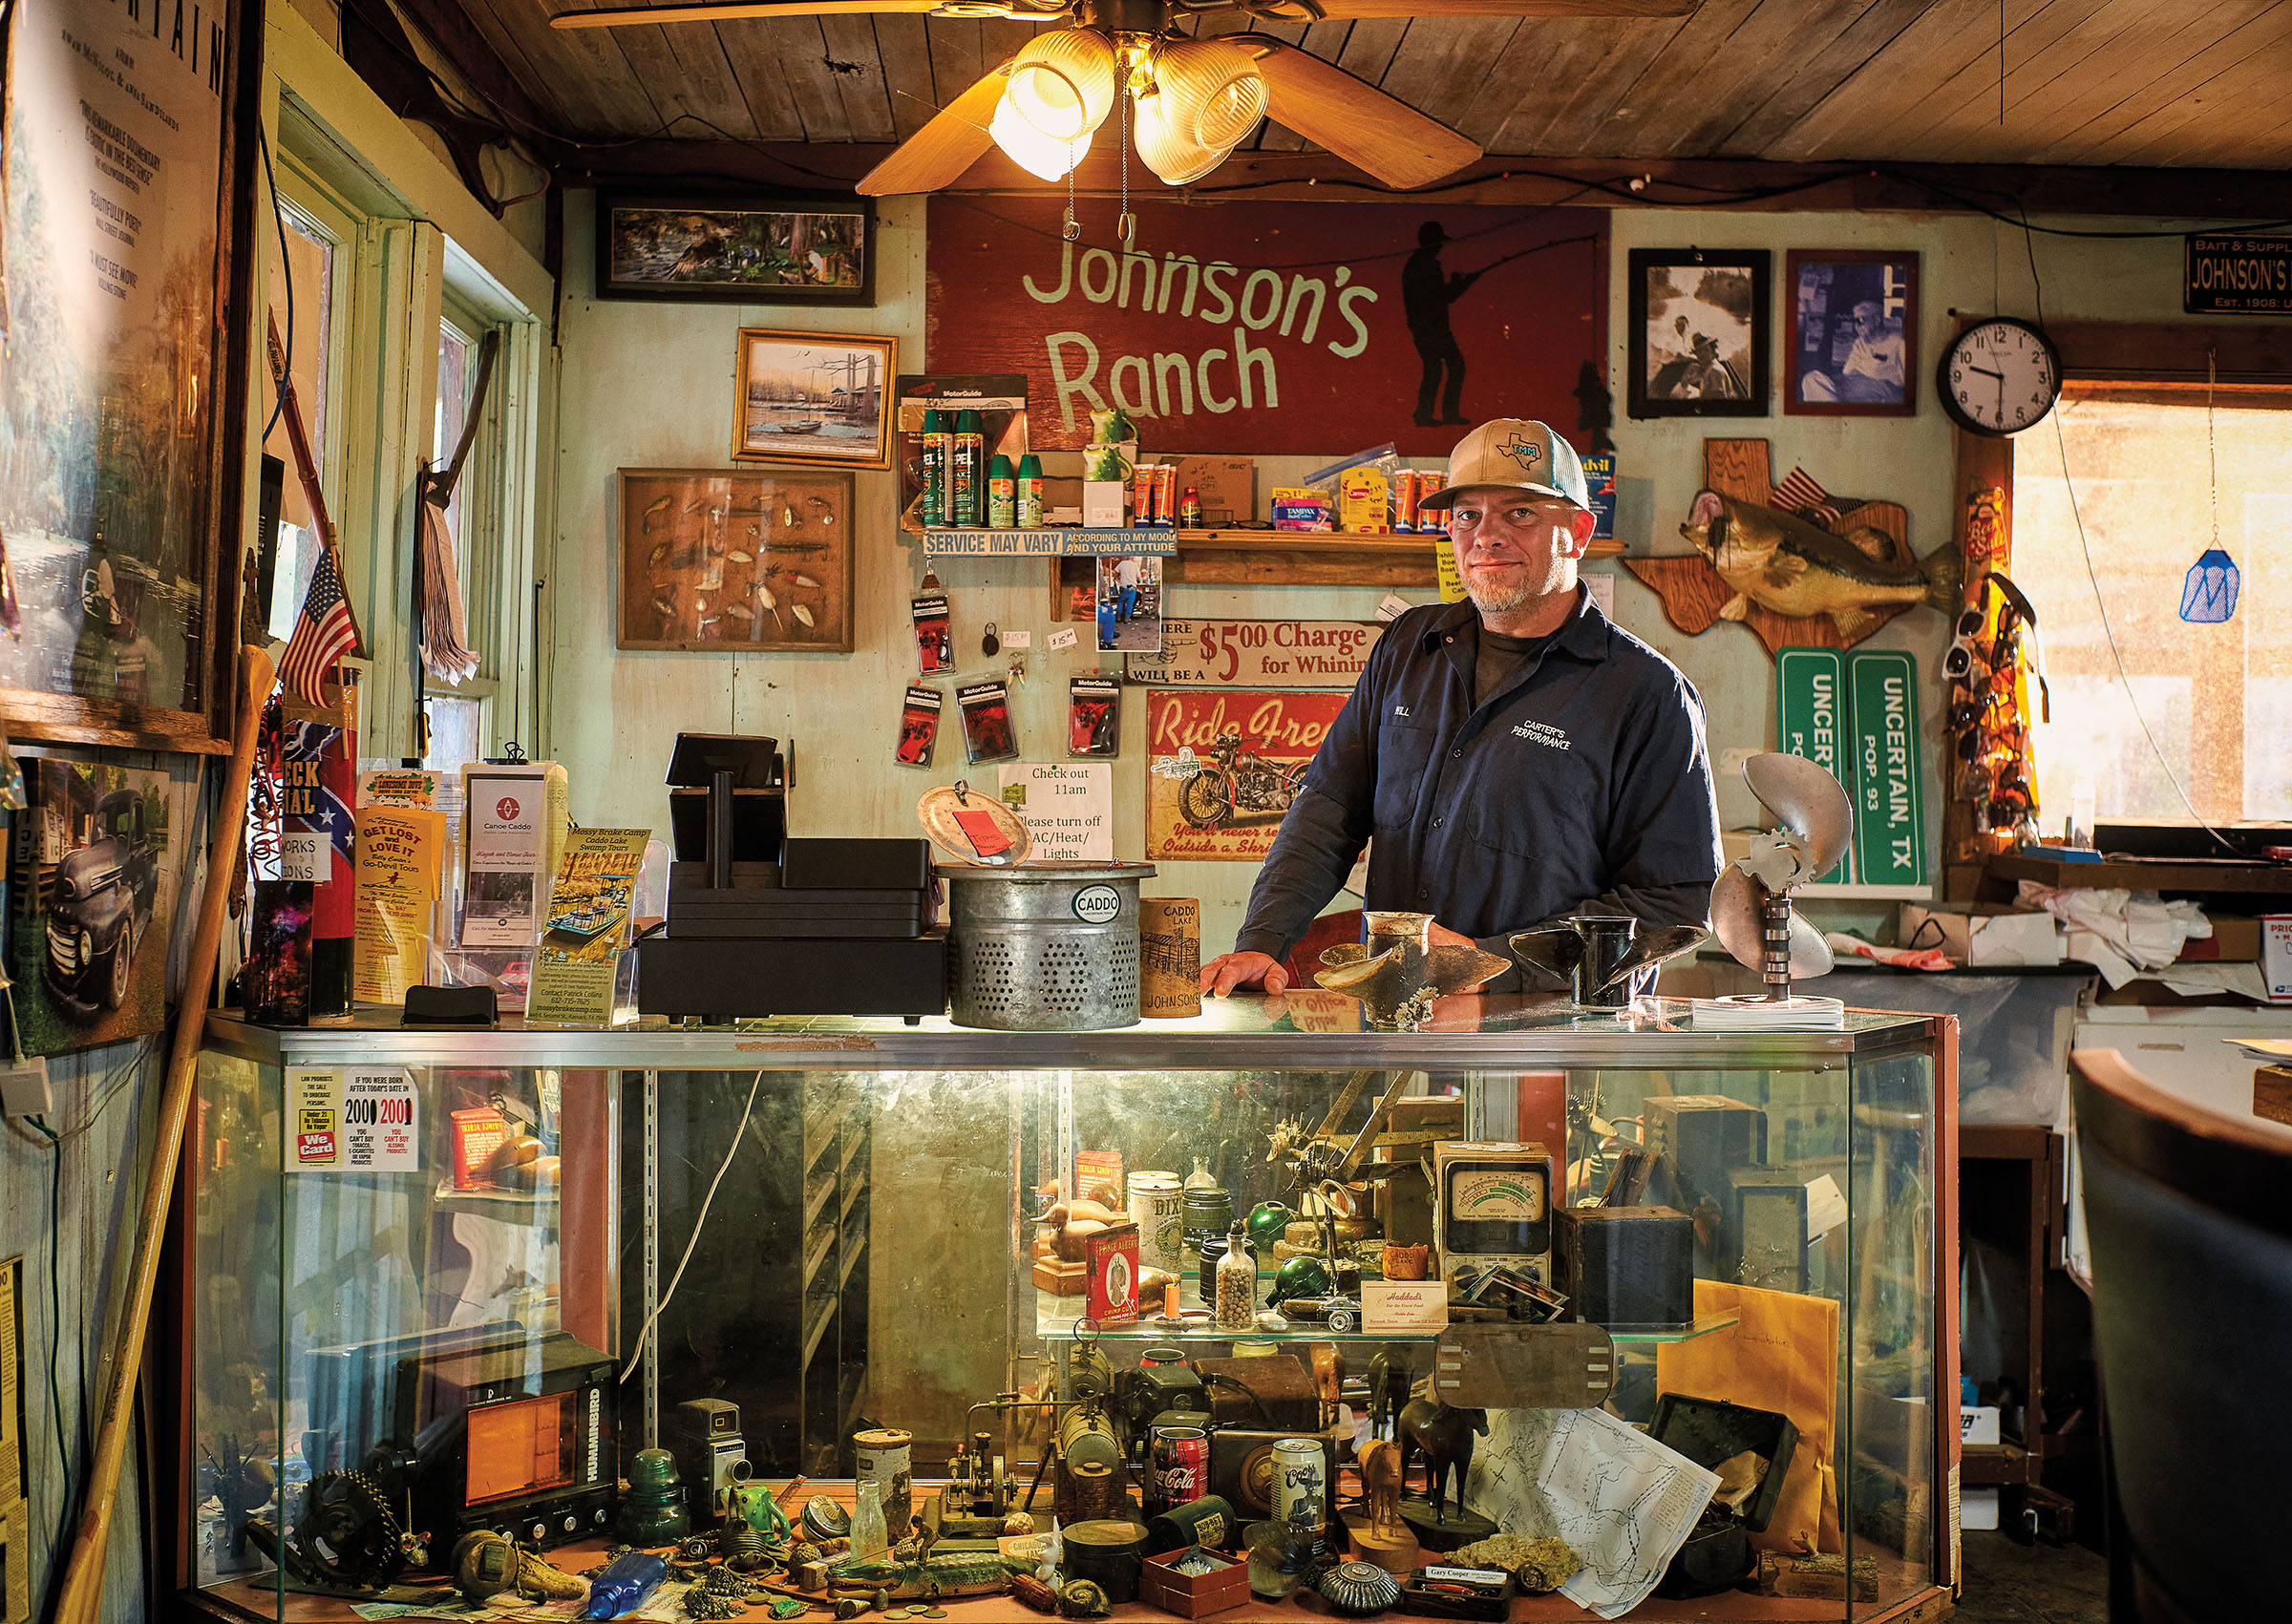 A man stands behind a busy counter in front of a sign reading Johnson's Ranch